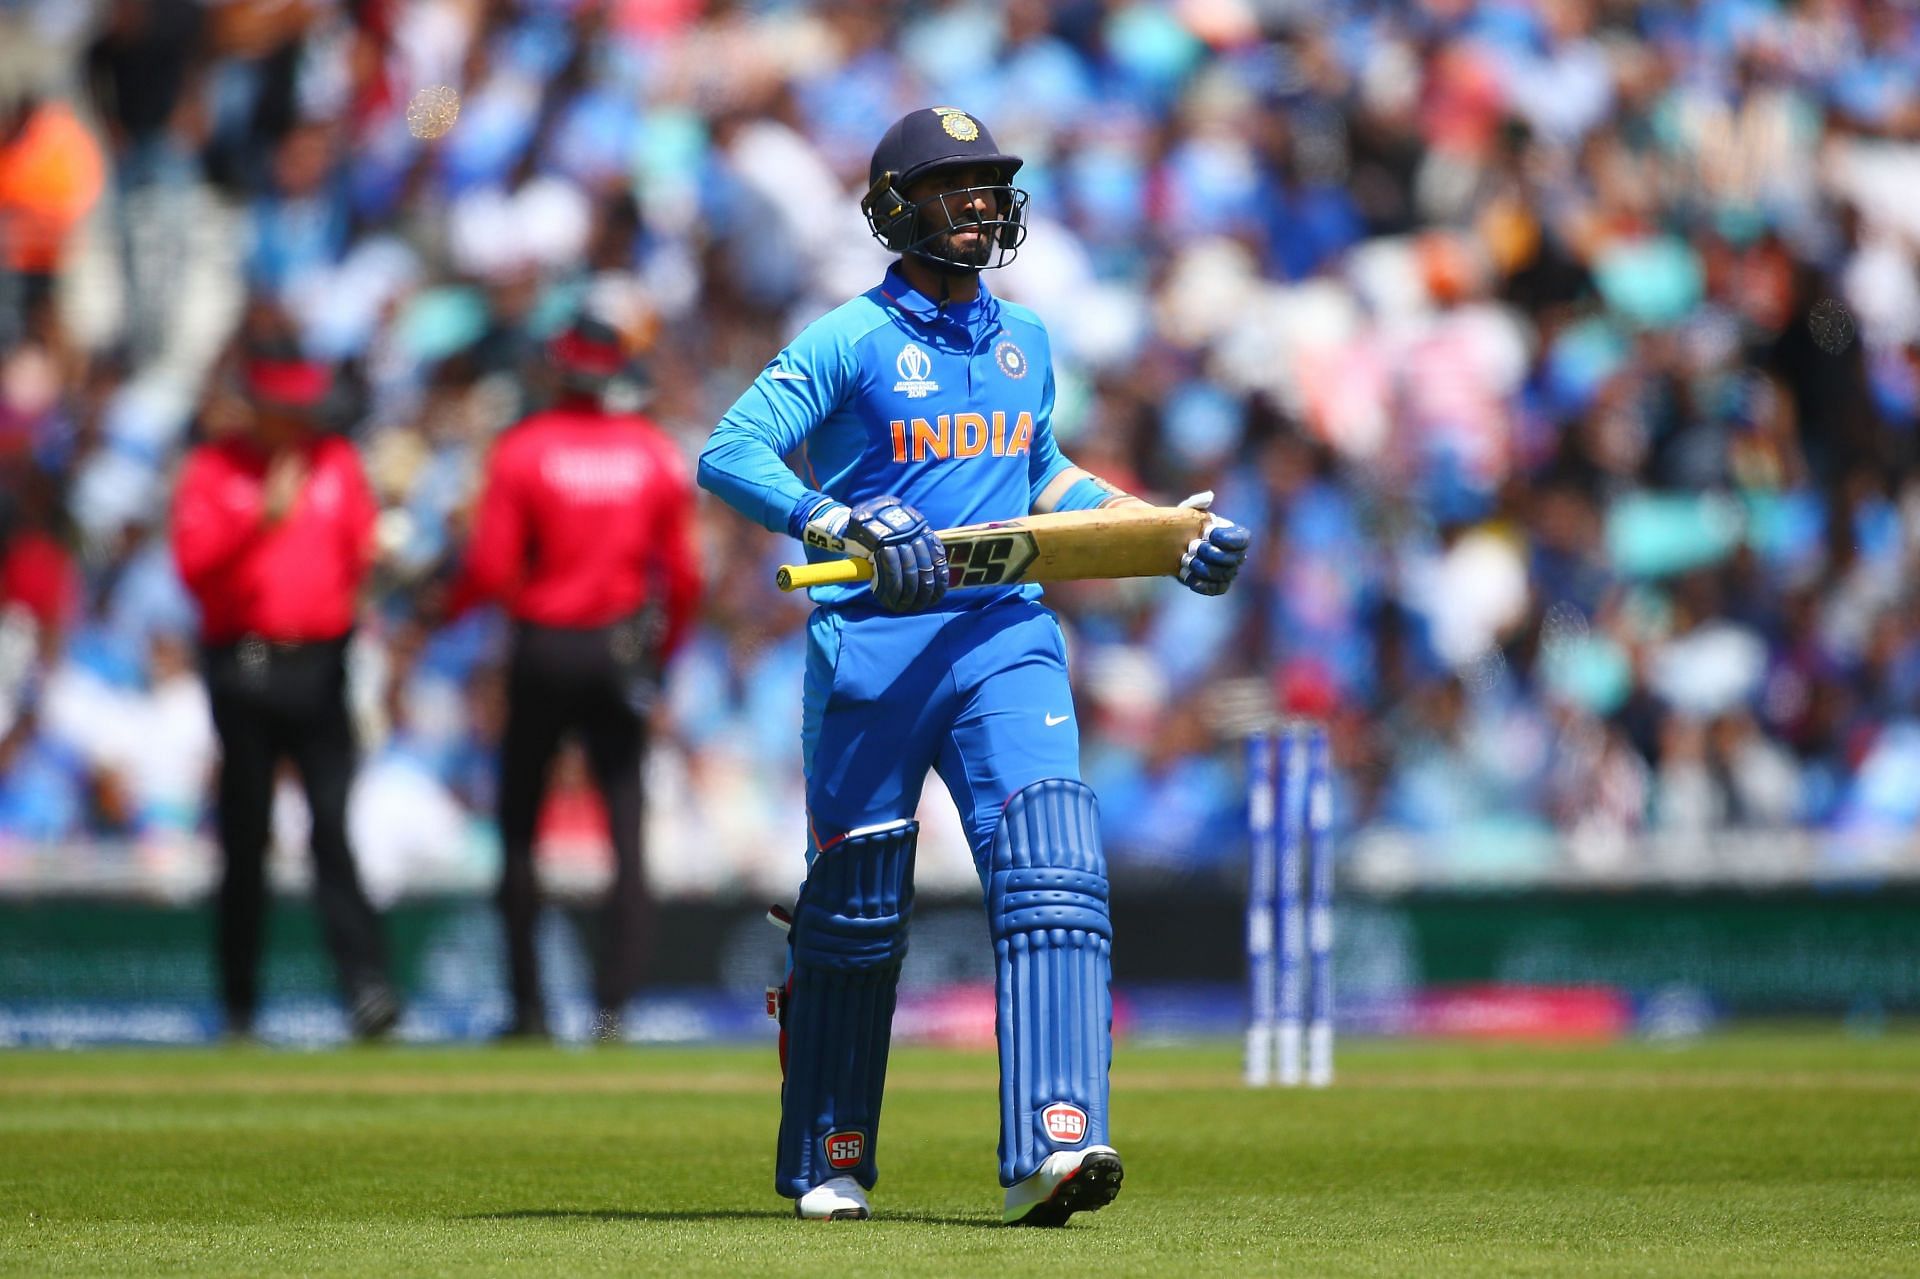 Dinesh Karthik is likely to wear the Indian cricket team jersey tonight